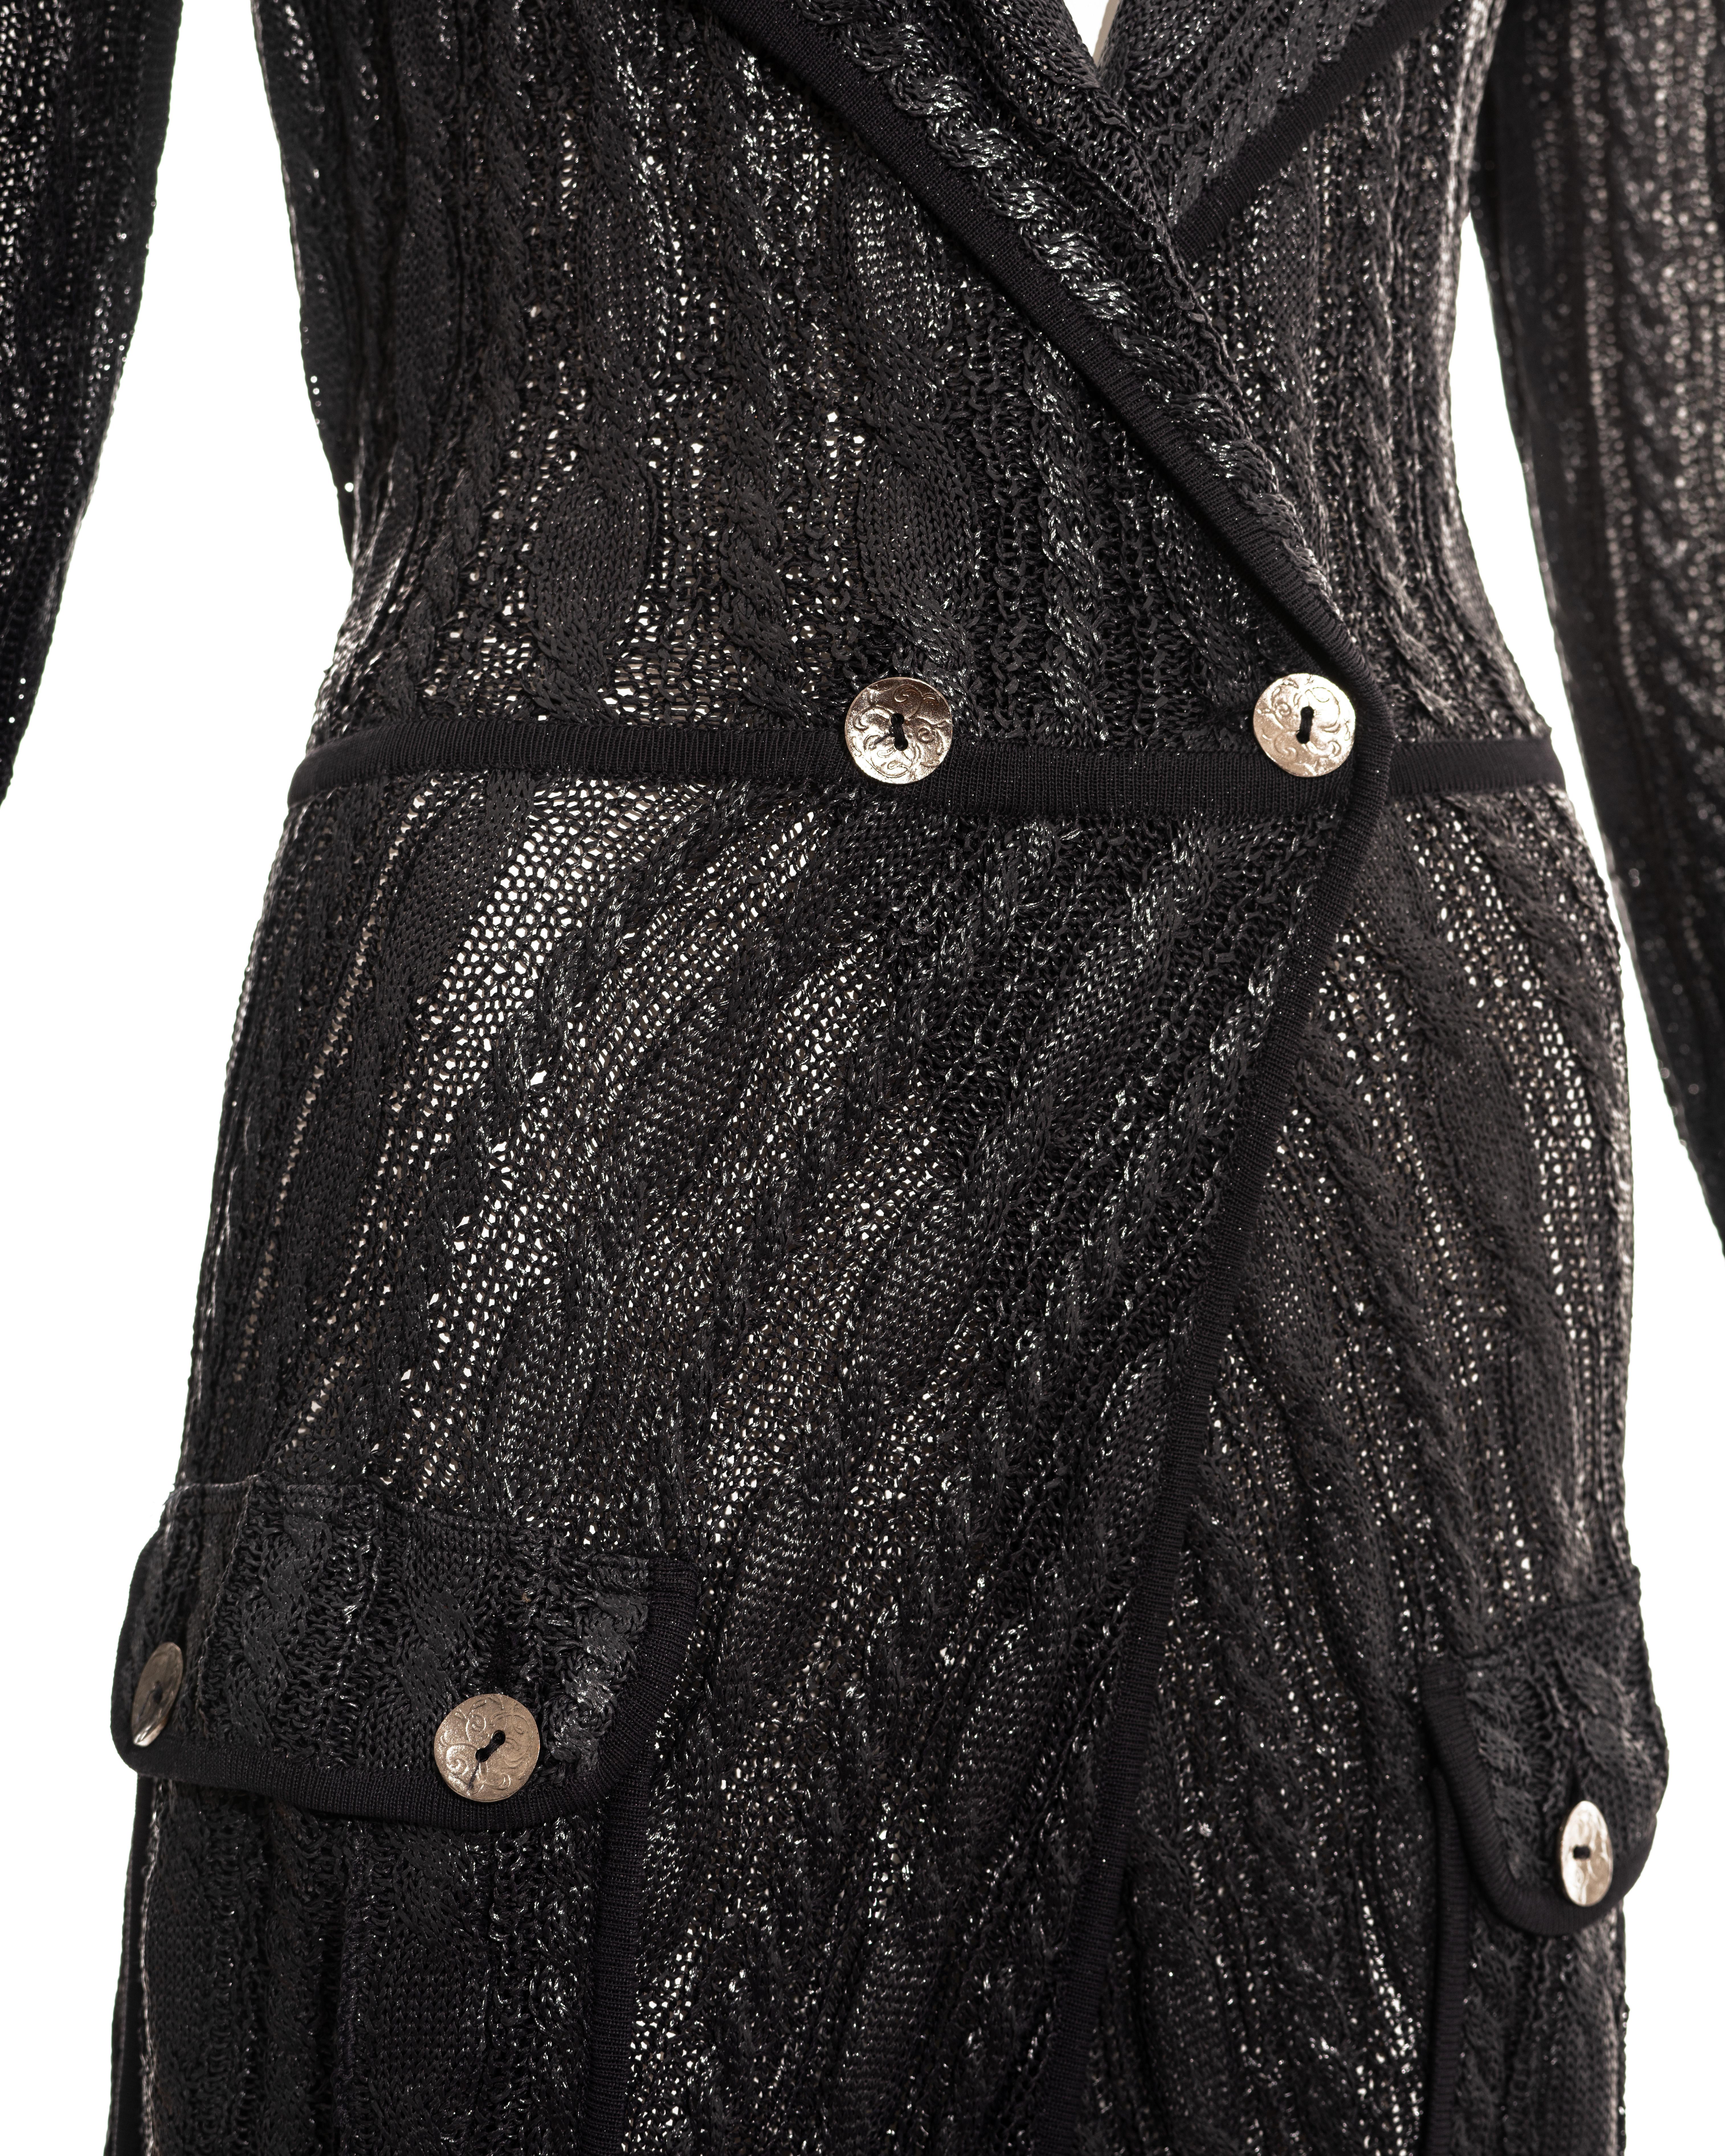 Black Christian Dior by John Galliano black rayon knitted evening cardigan, ss 1999 For Sale